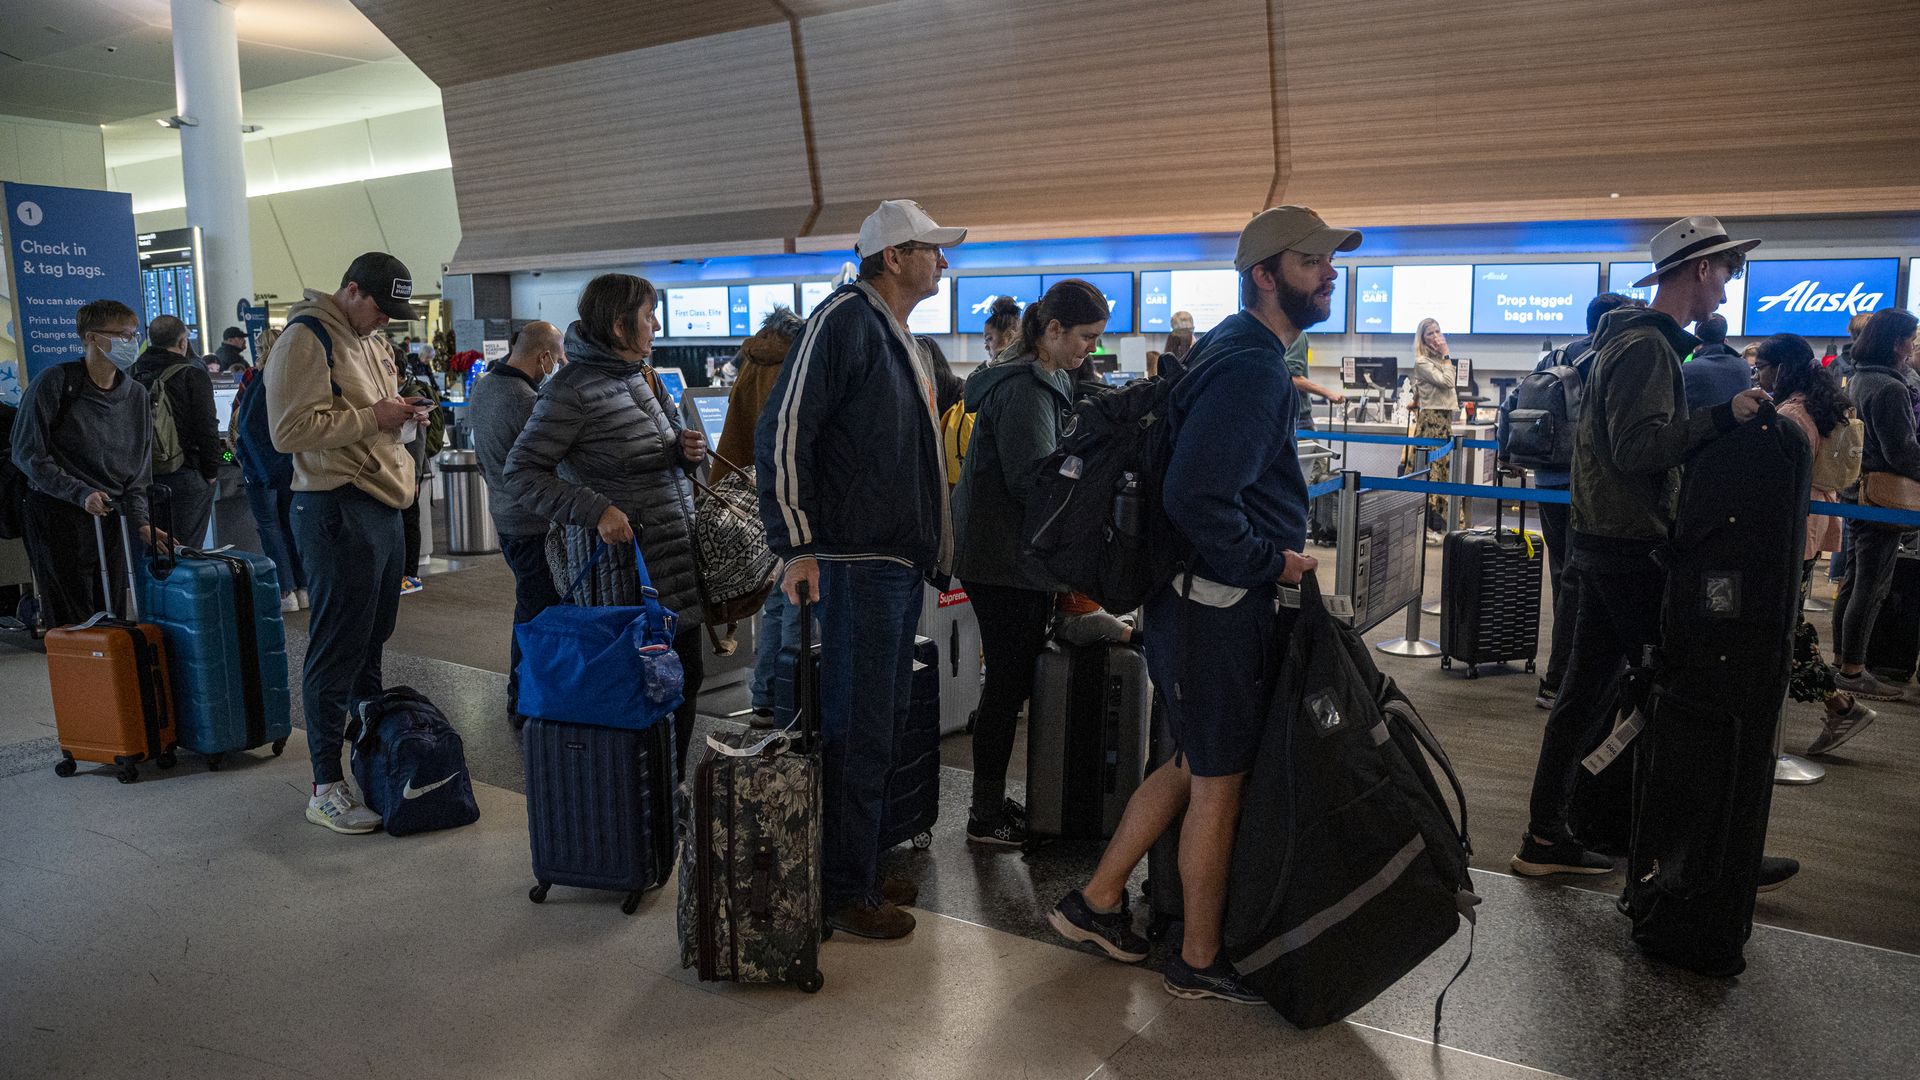 Travelers wait to check-in at the Alaska Airlines counter at San Francisco International Airport (SFO) in San Francisco, California, US, on Tuesday, Dec. 27, 2022